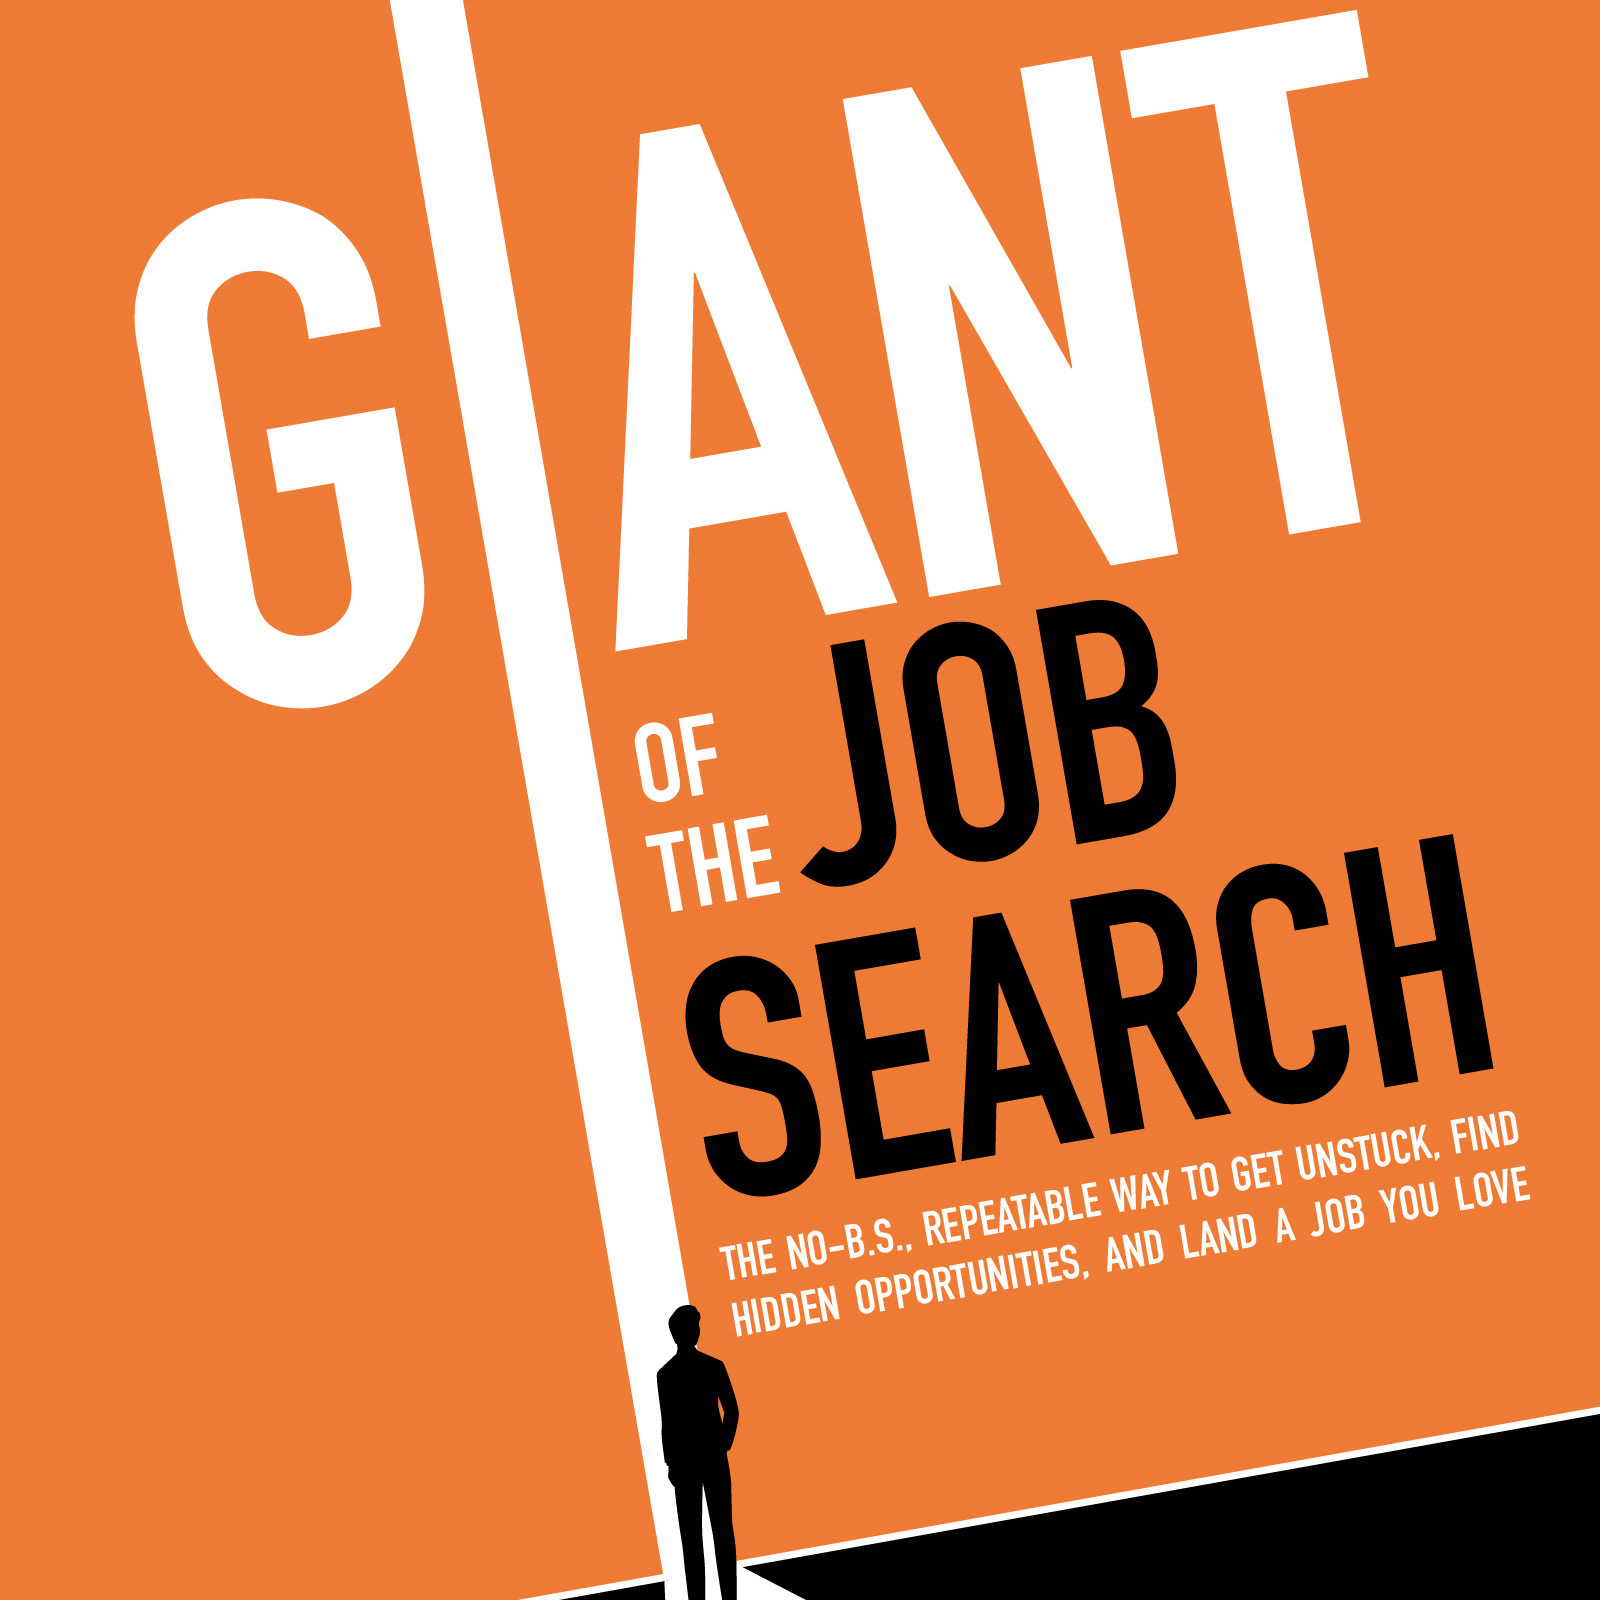 Giant of the Job Search